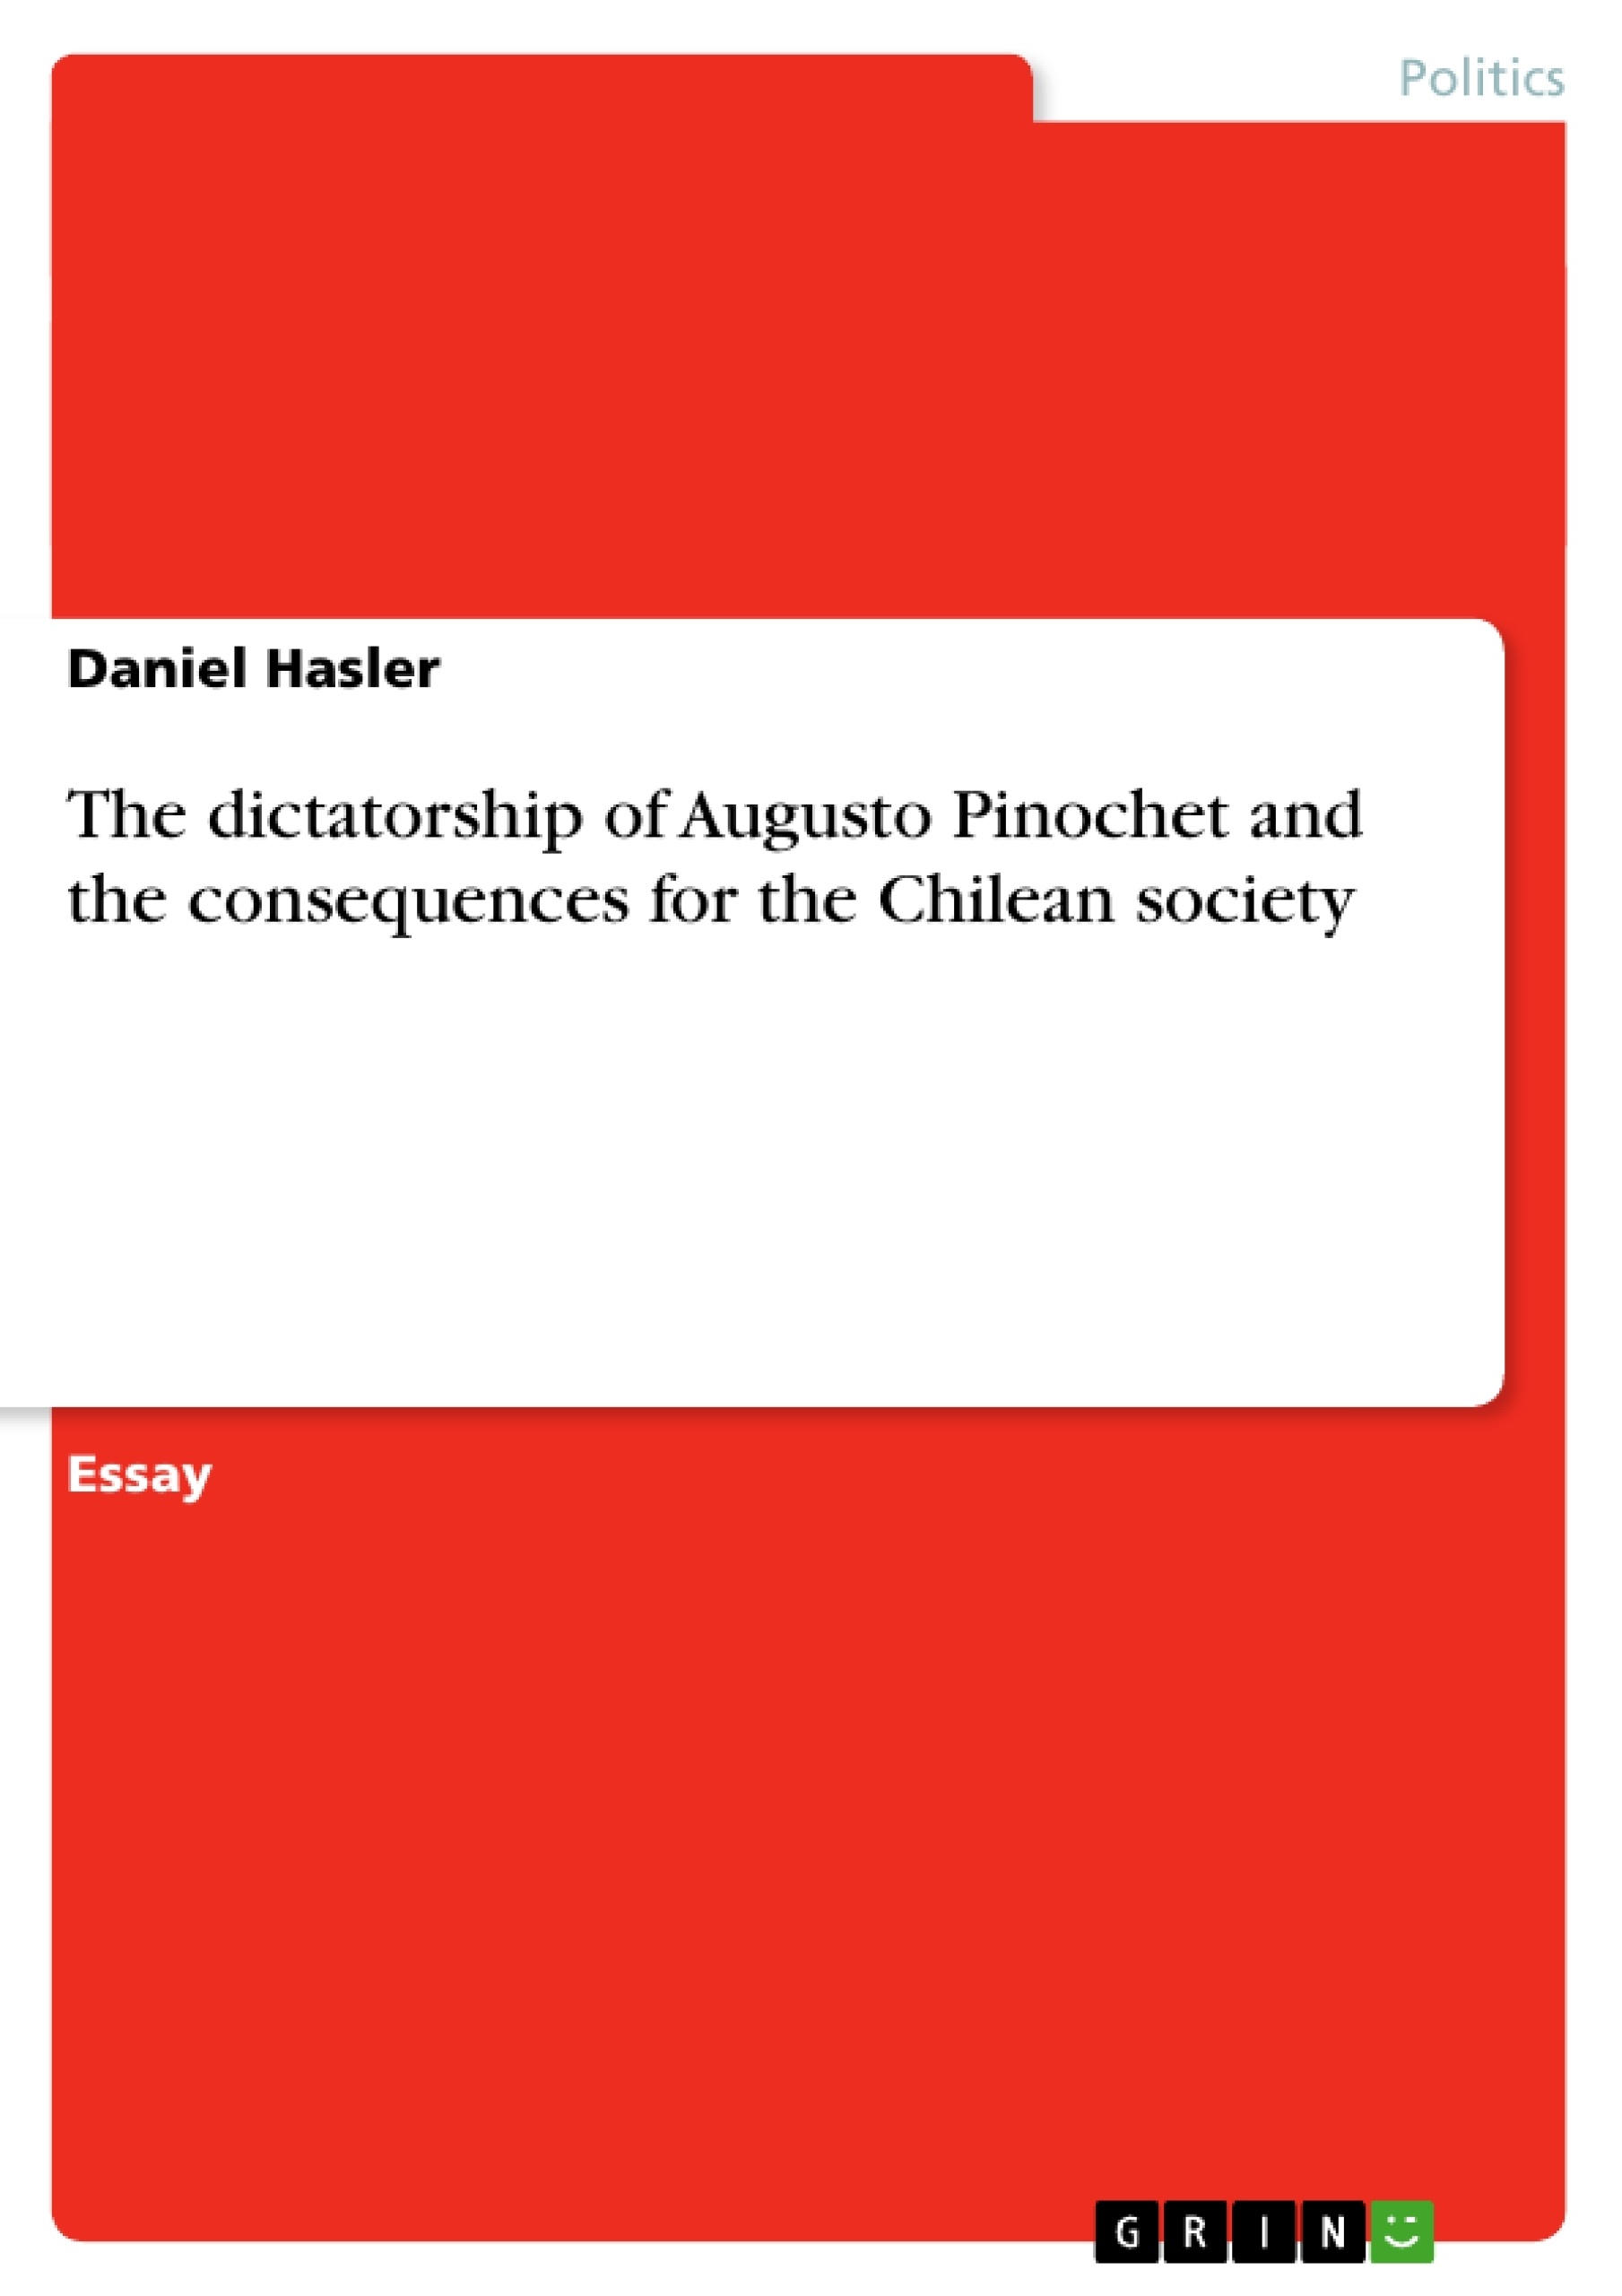 Title: The dictatorship of Augusto Pinochet and the consequences for the Chilean society